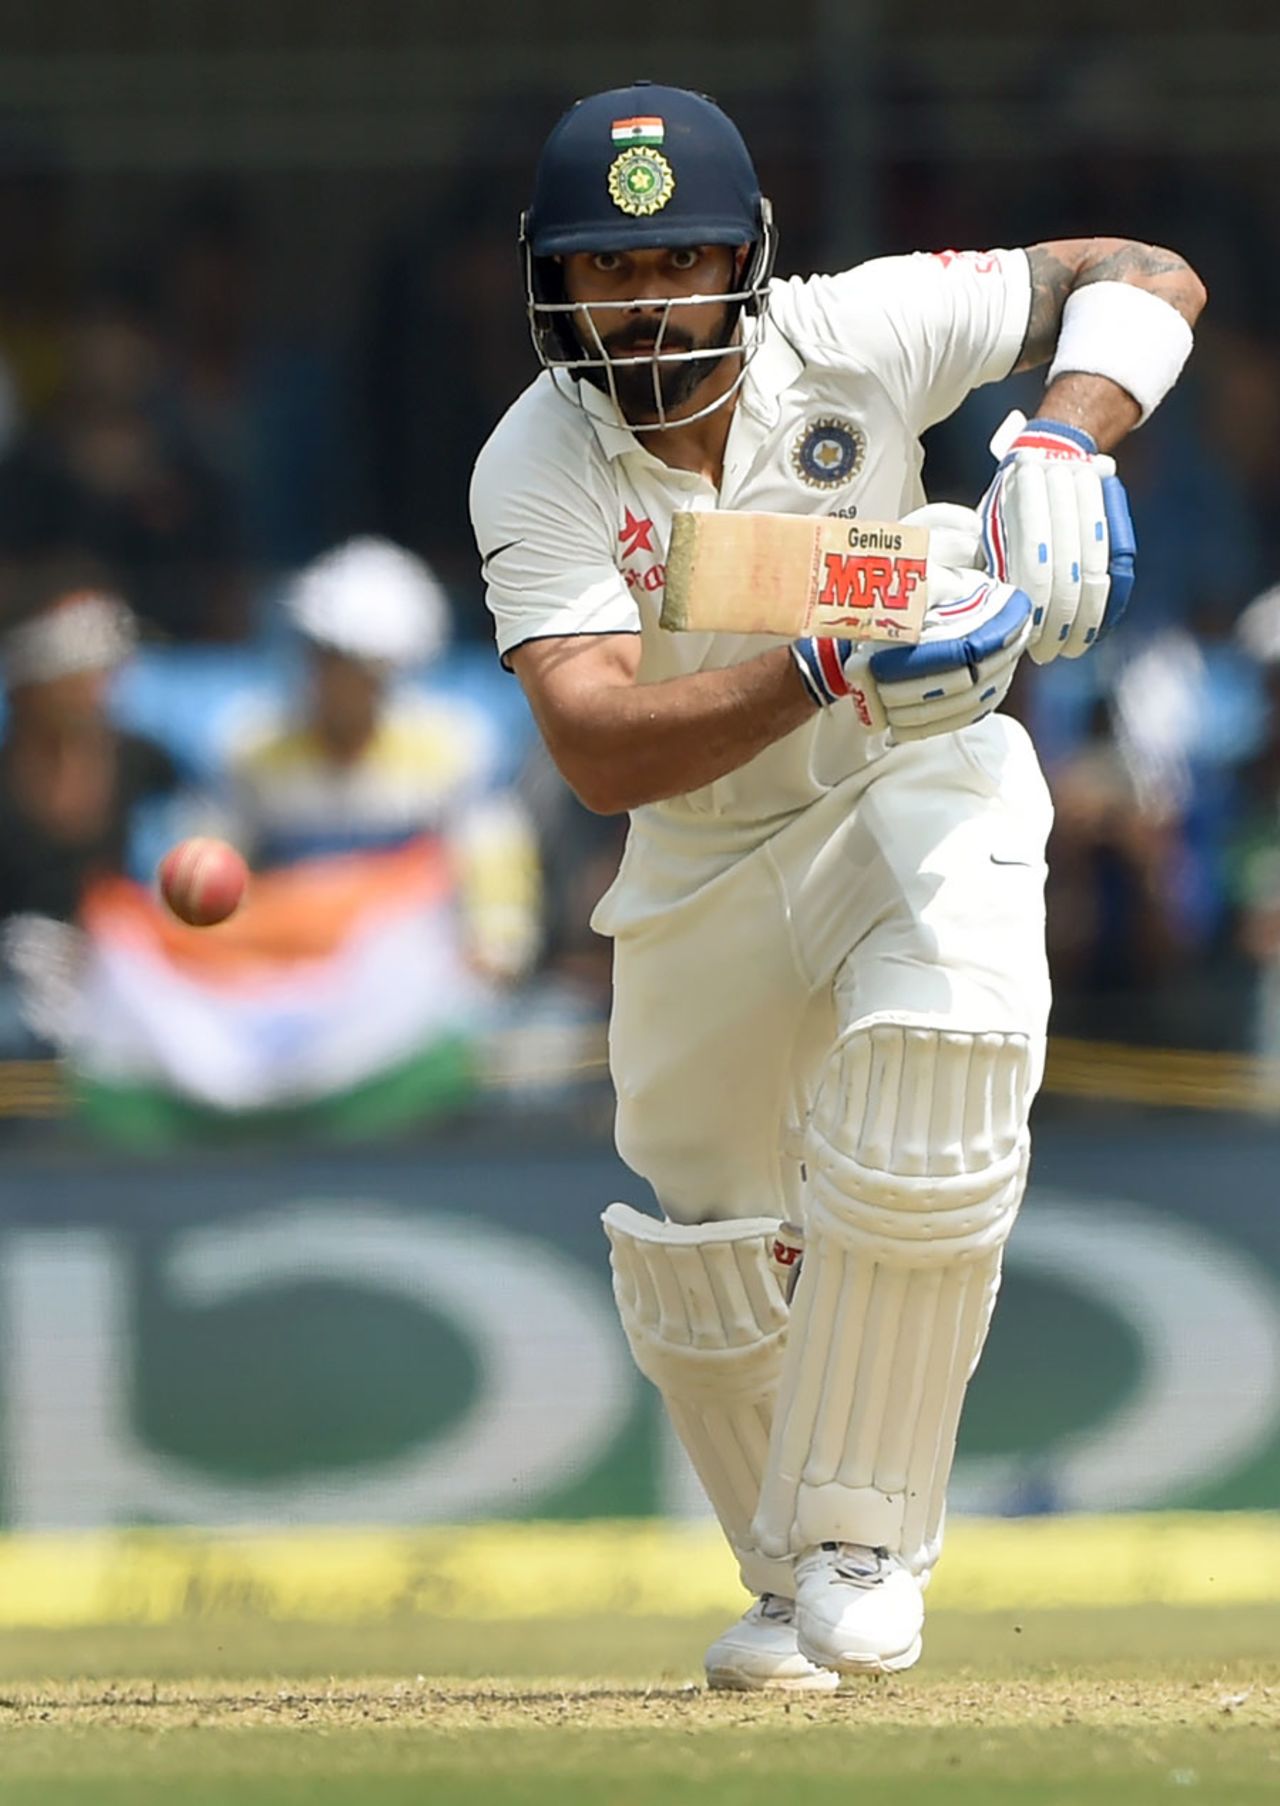 Virat Kohli sets off for a single after punching one down the ground, India v New Zealand, 3rd Test, Indore, 2nd day, October 9, 2016